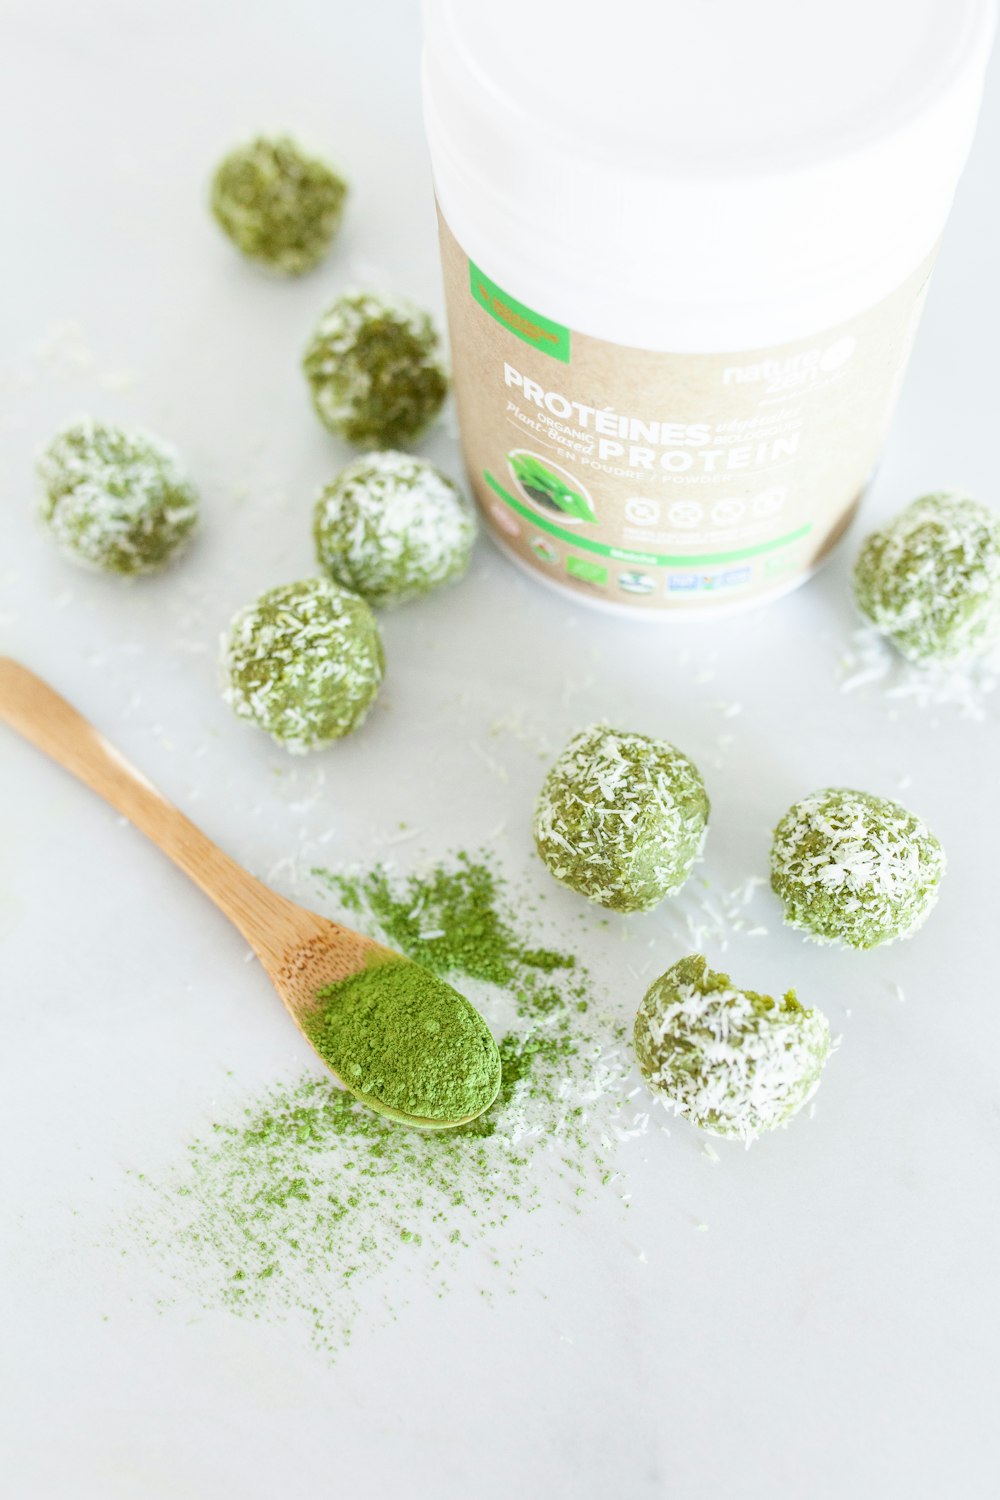 a wooden spoon filled with green powder next to a jar of powdered sugar